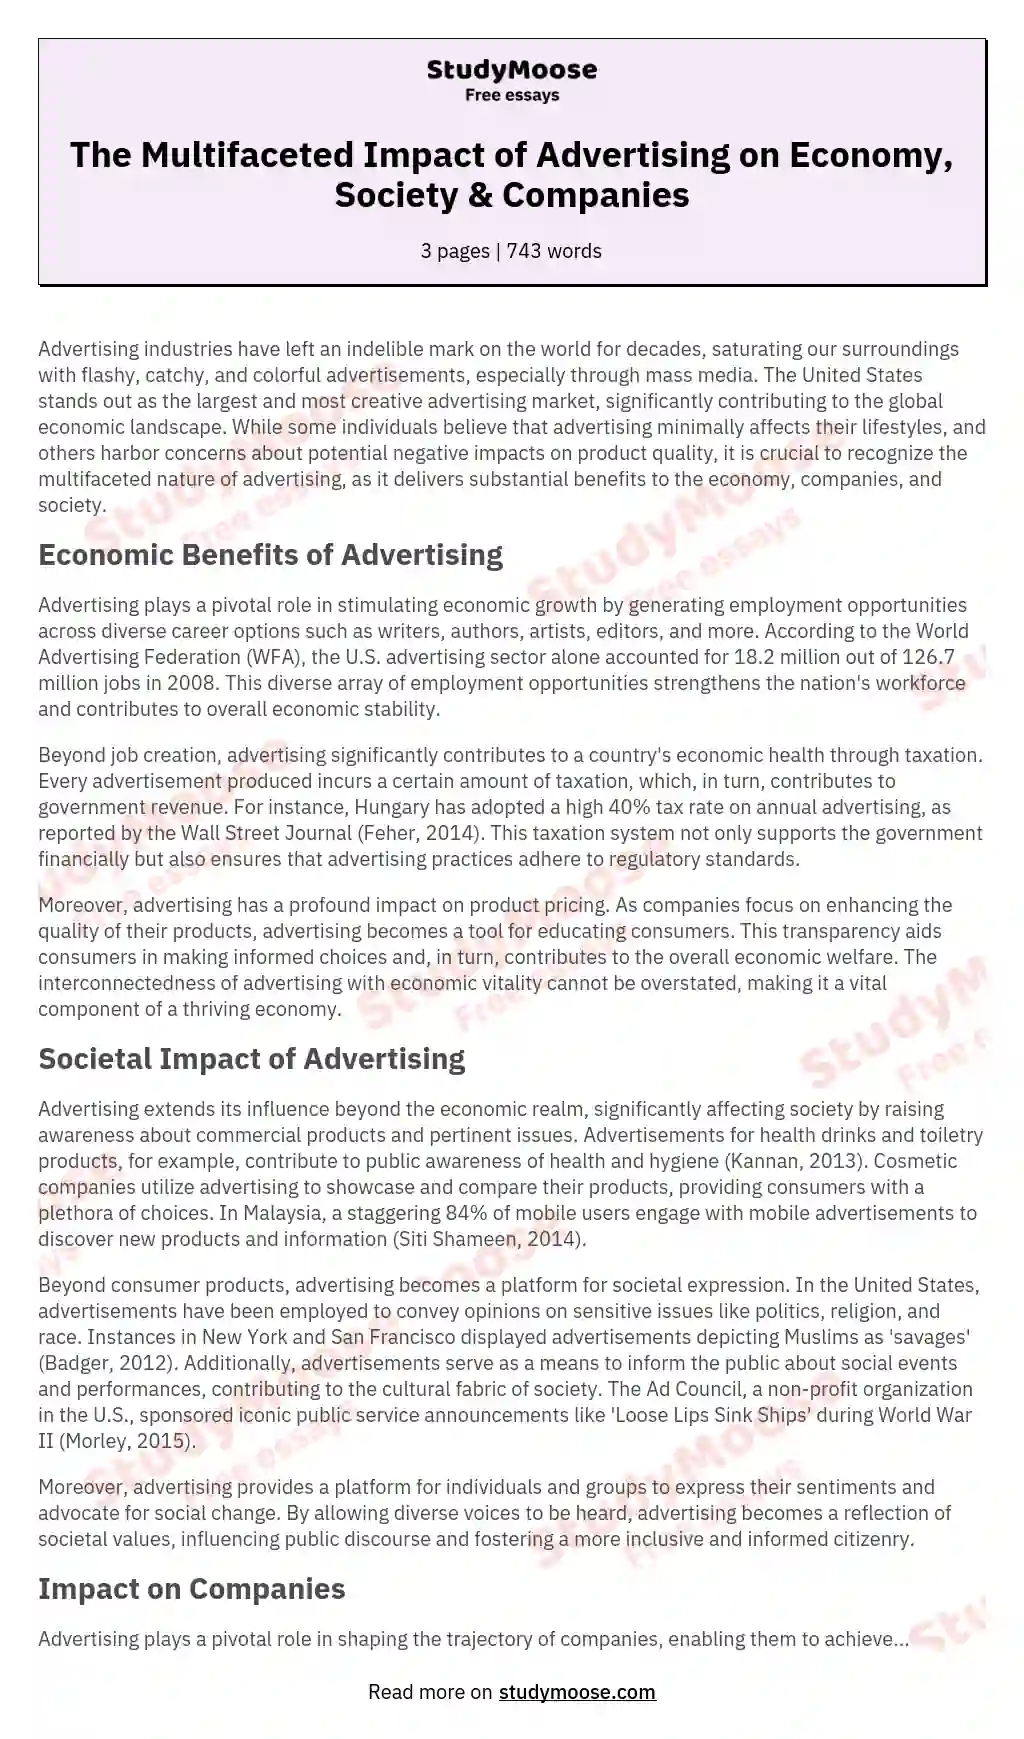 The Multifaceted Impact of Advertising on Economy, Society & Companies essay